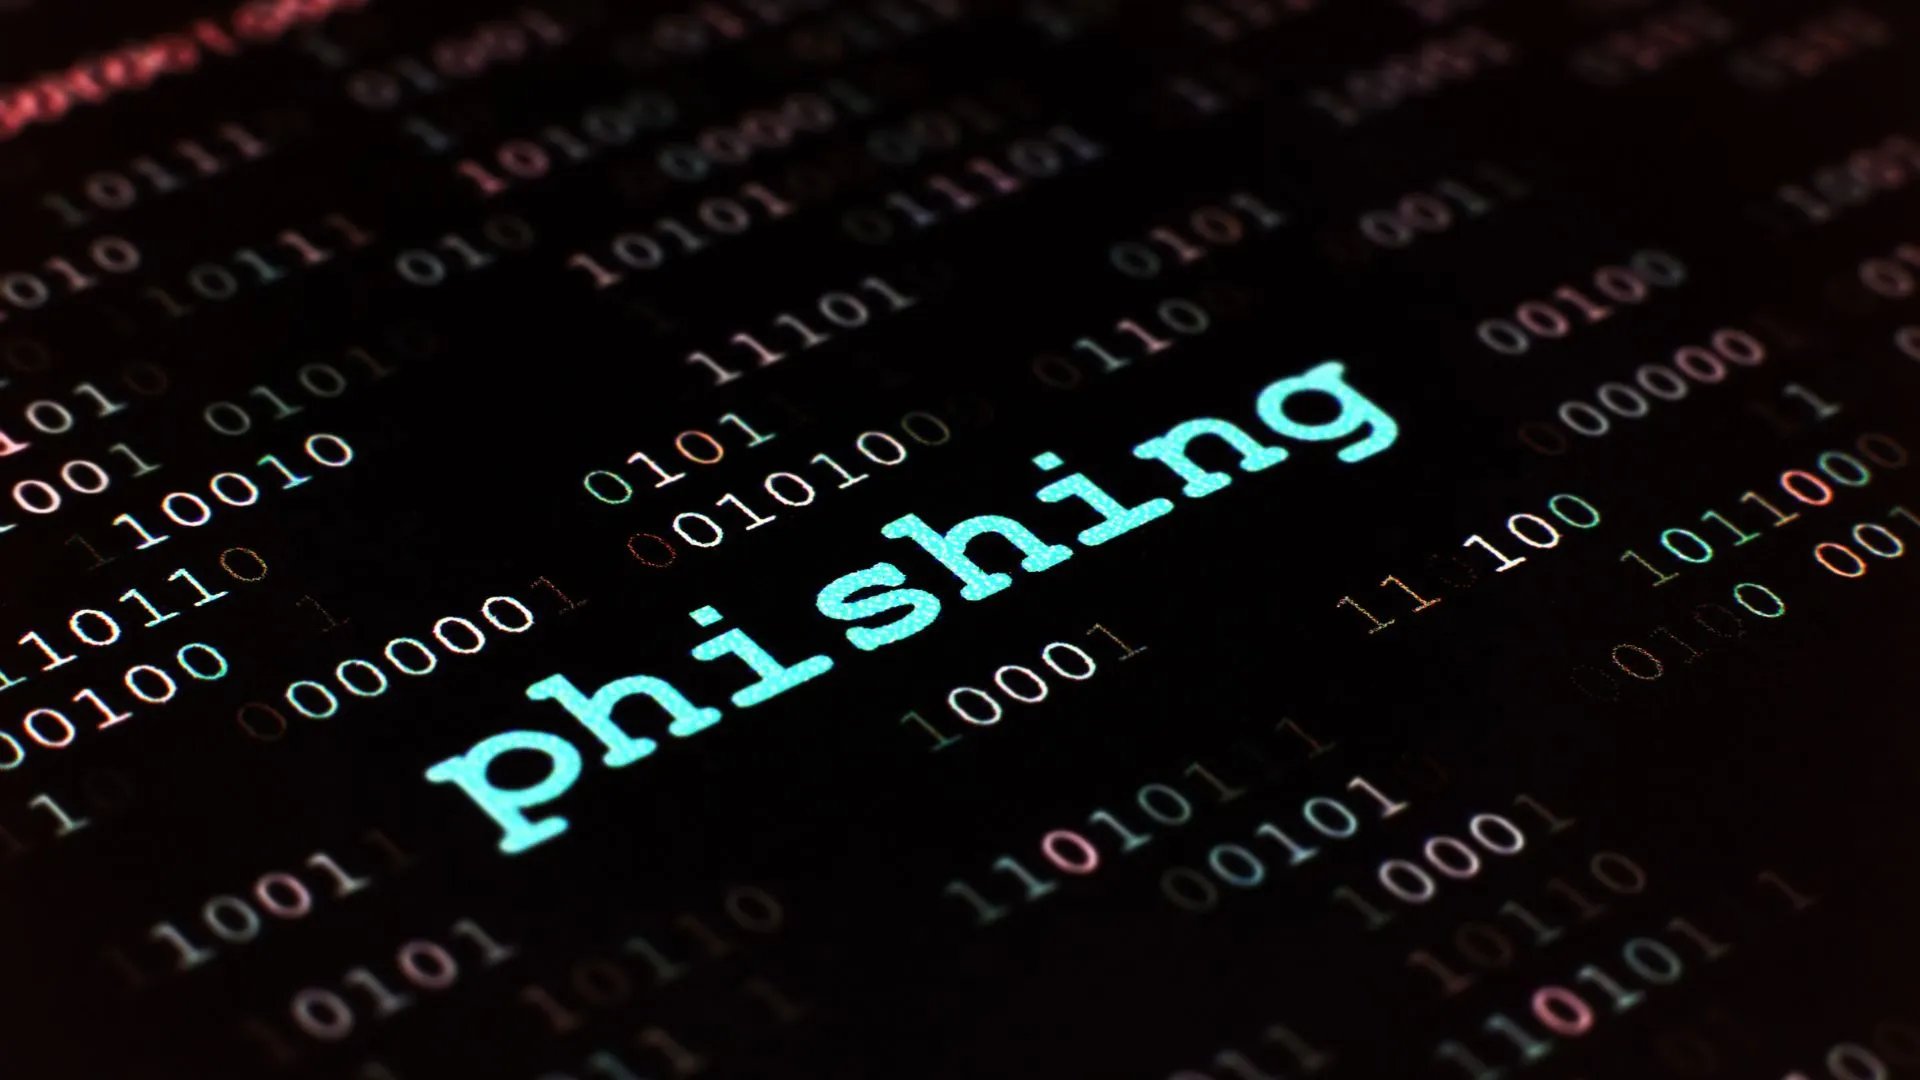  Image with the word “phishing” in the center front, with a background of black and white binary code decor